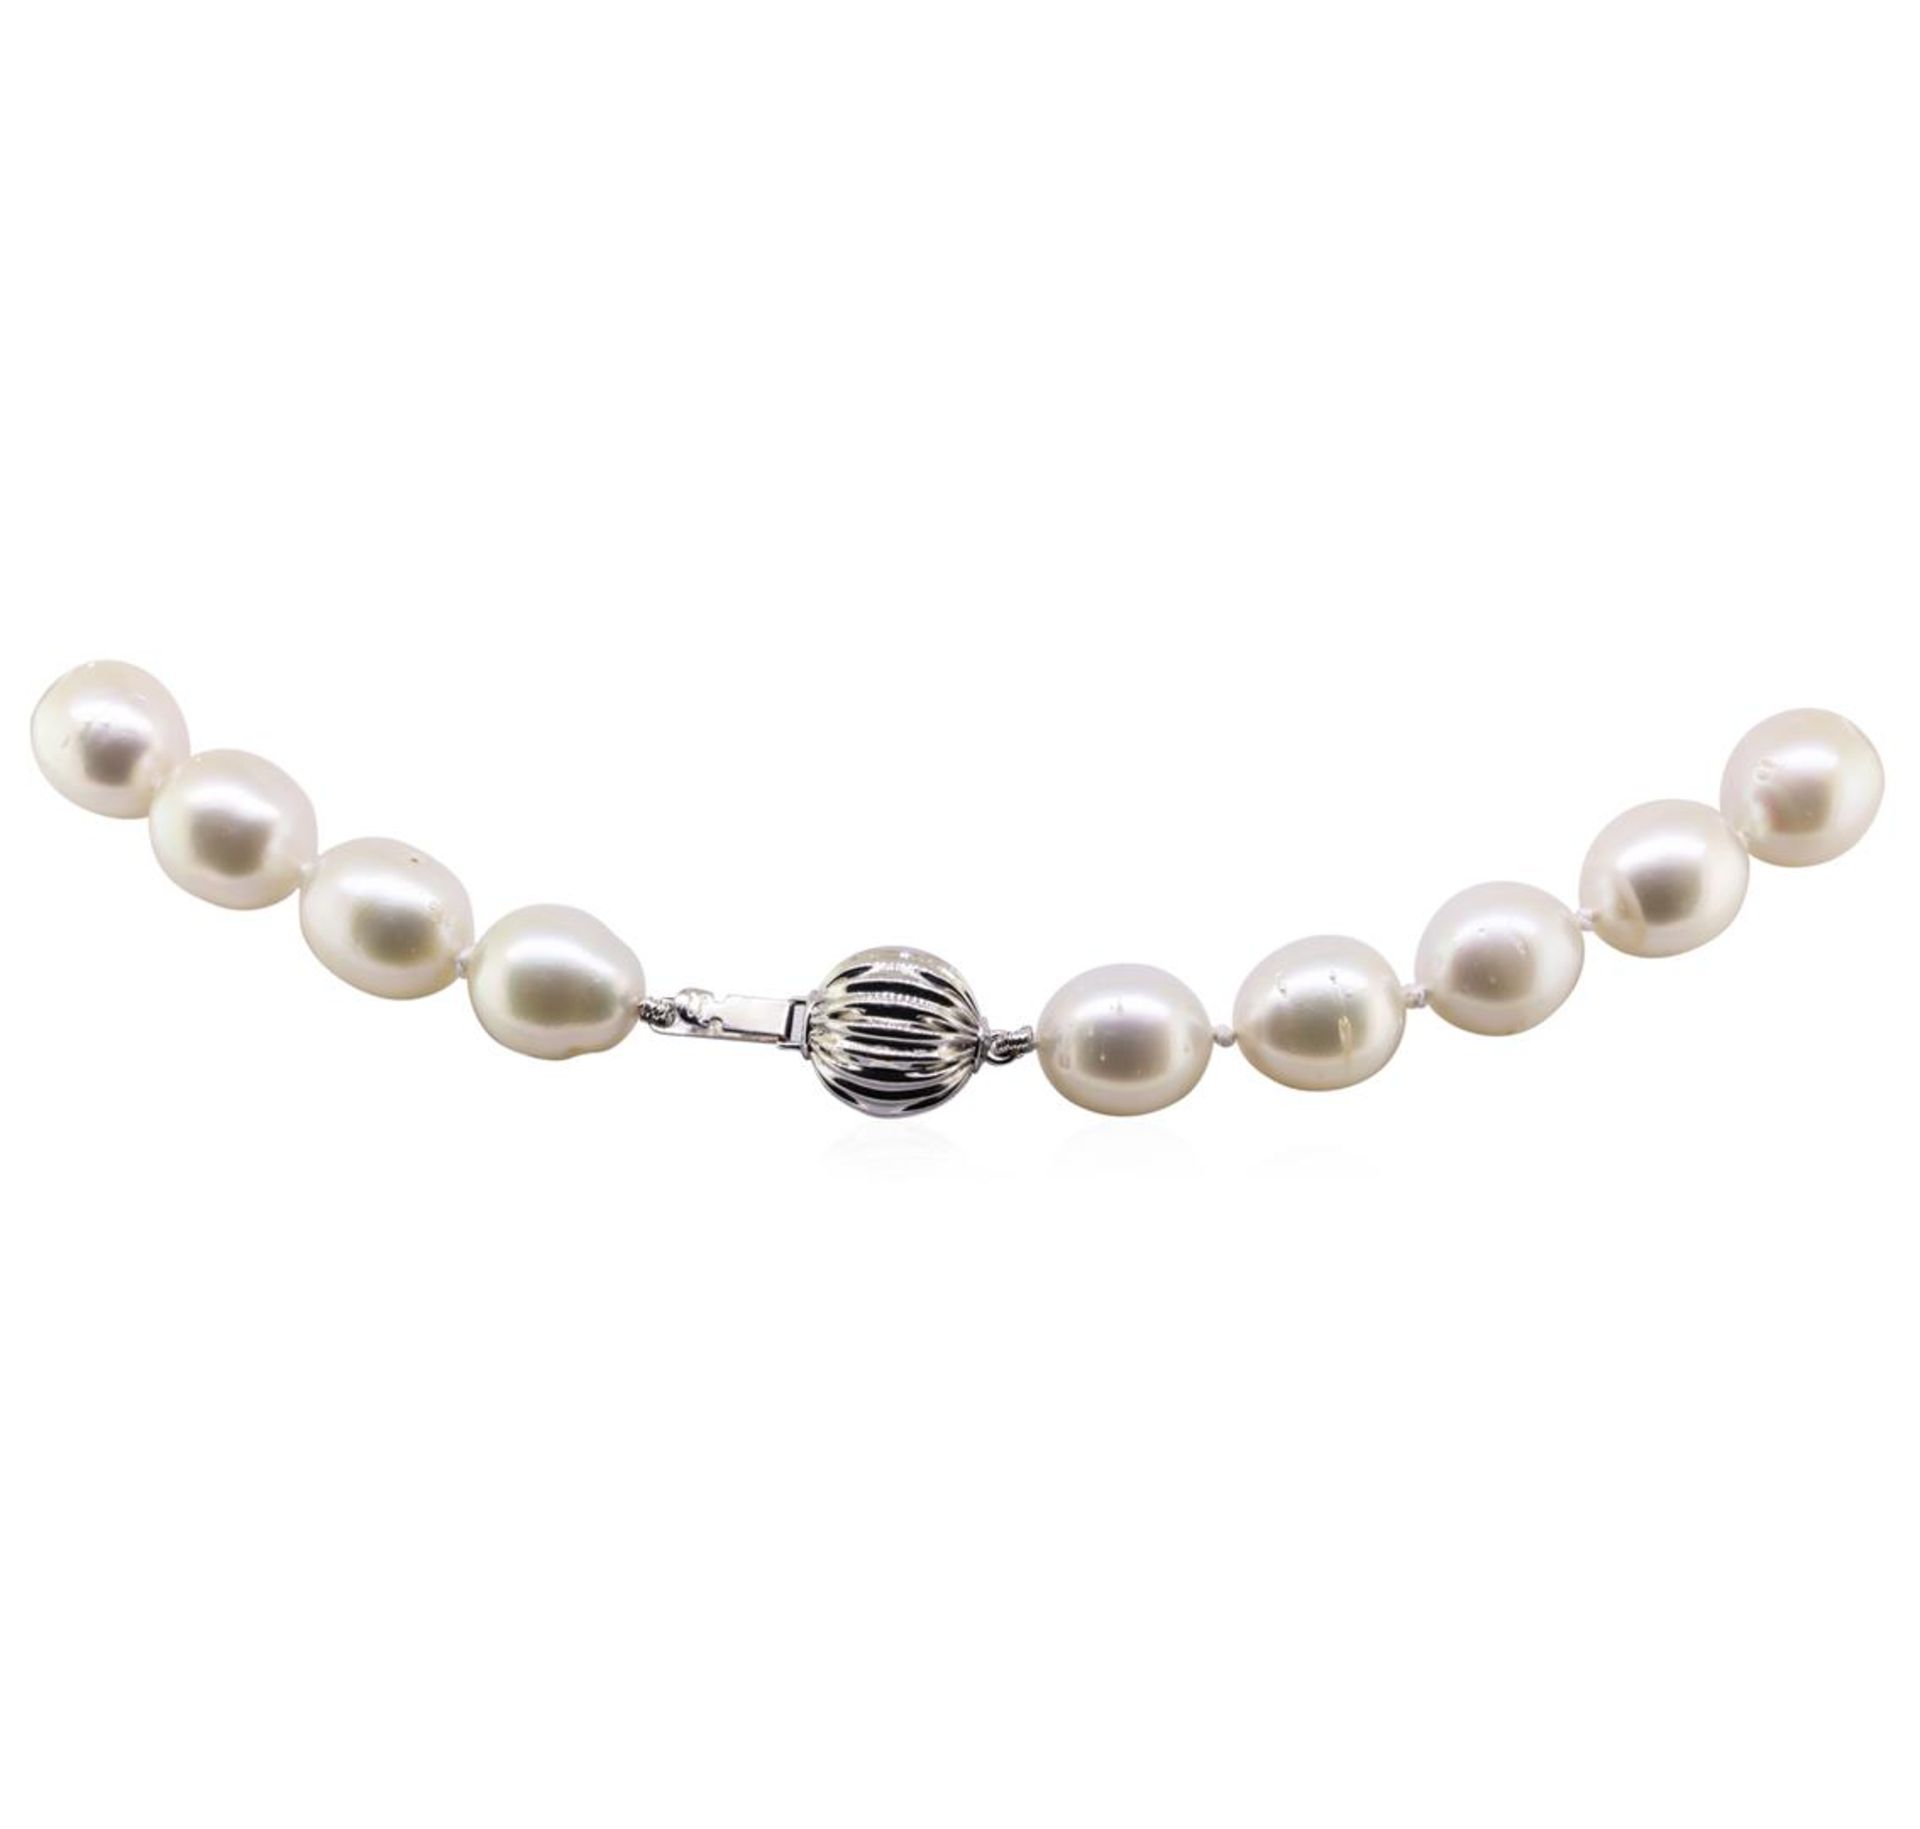 South Sea Pearl Necklace - 14KT White Gold - Image 2 of 3